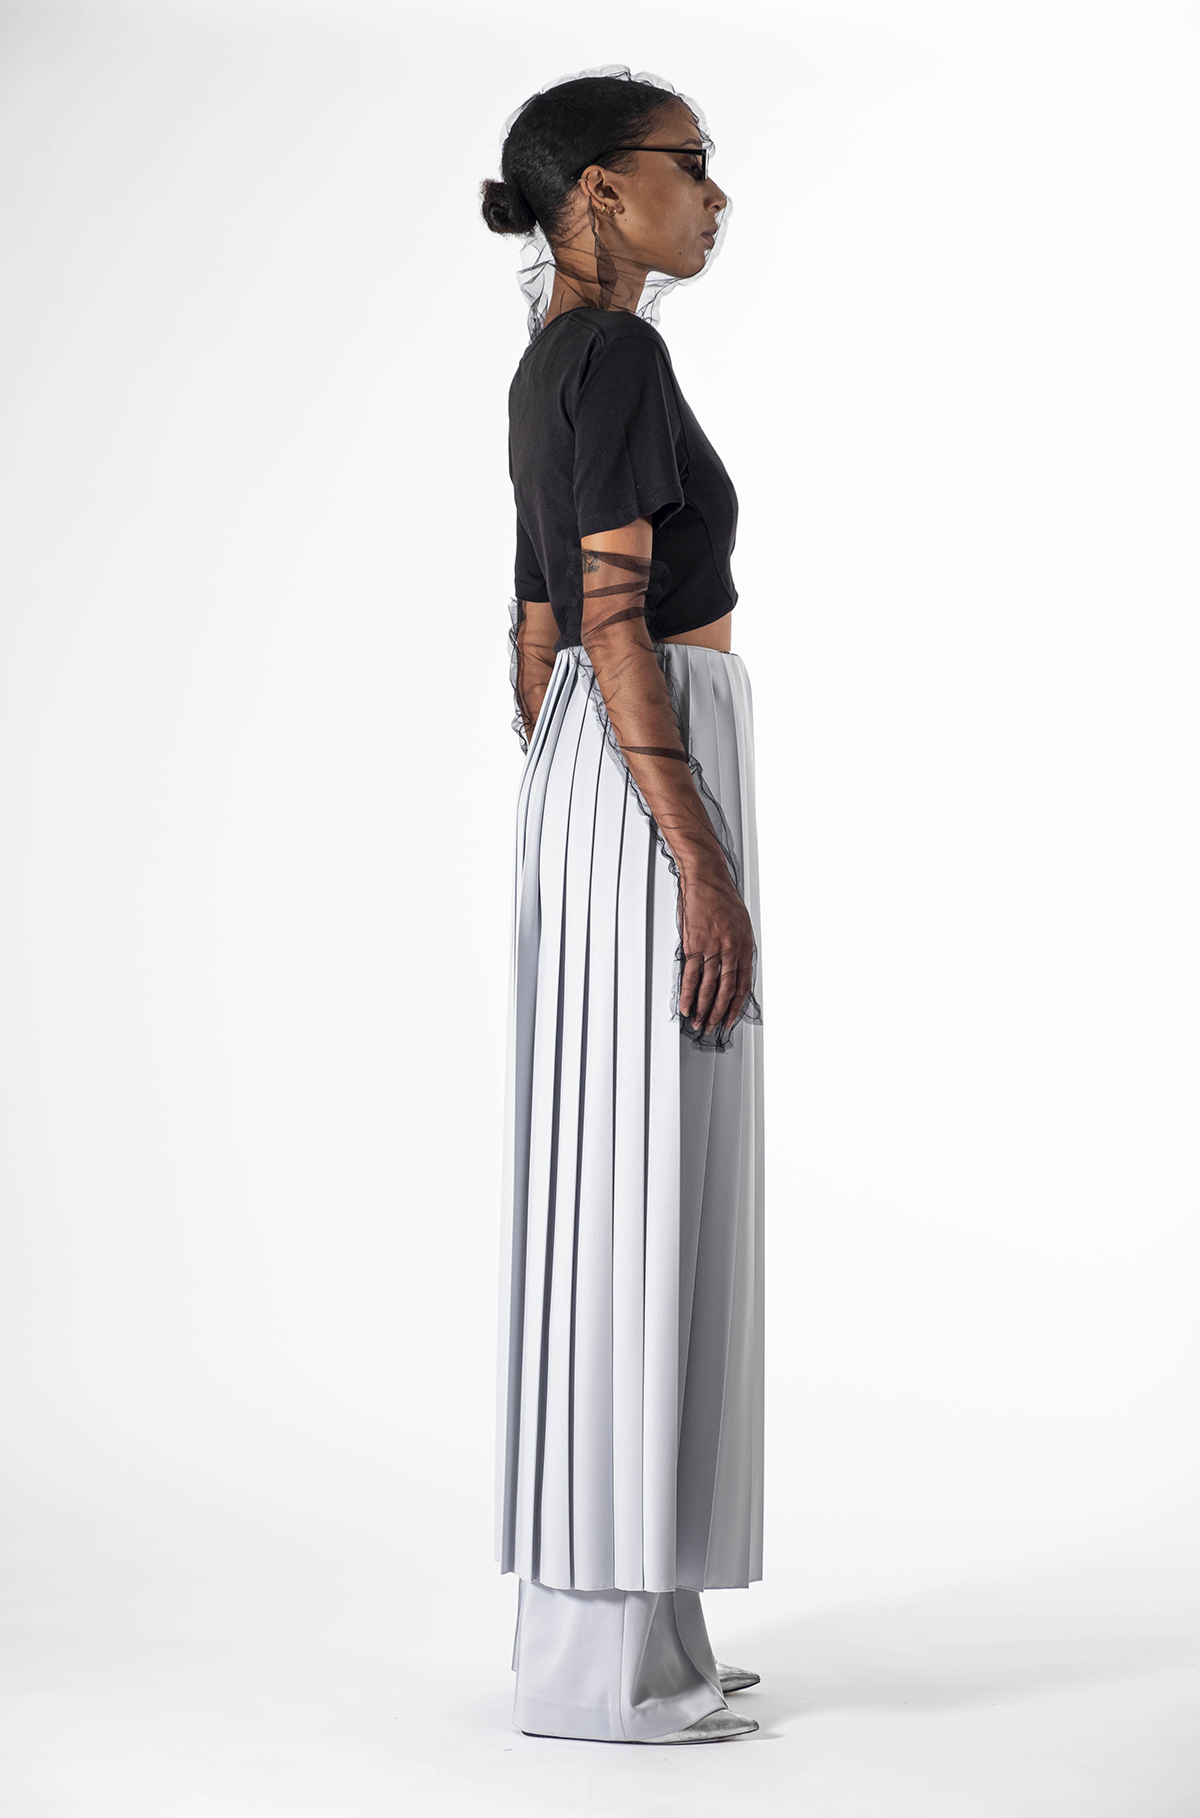 Removable pleated tailored pants set for pre-order